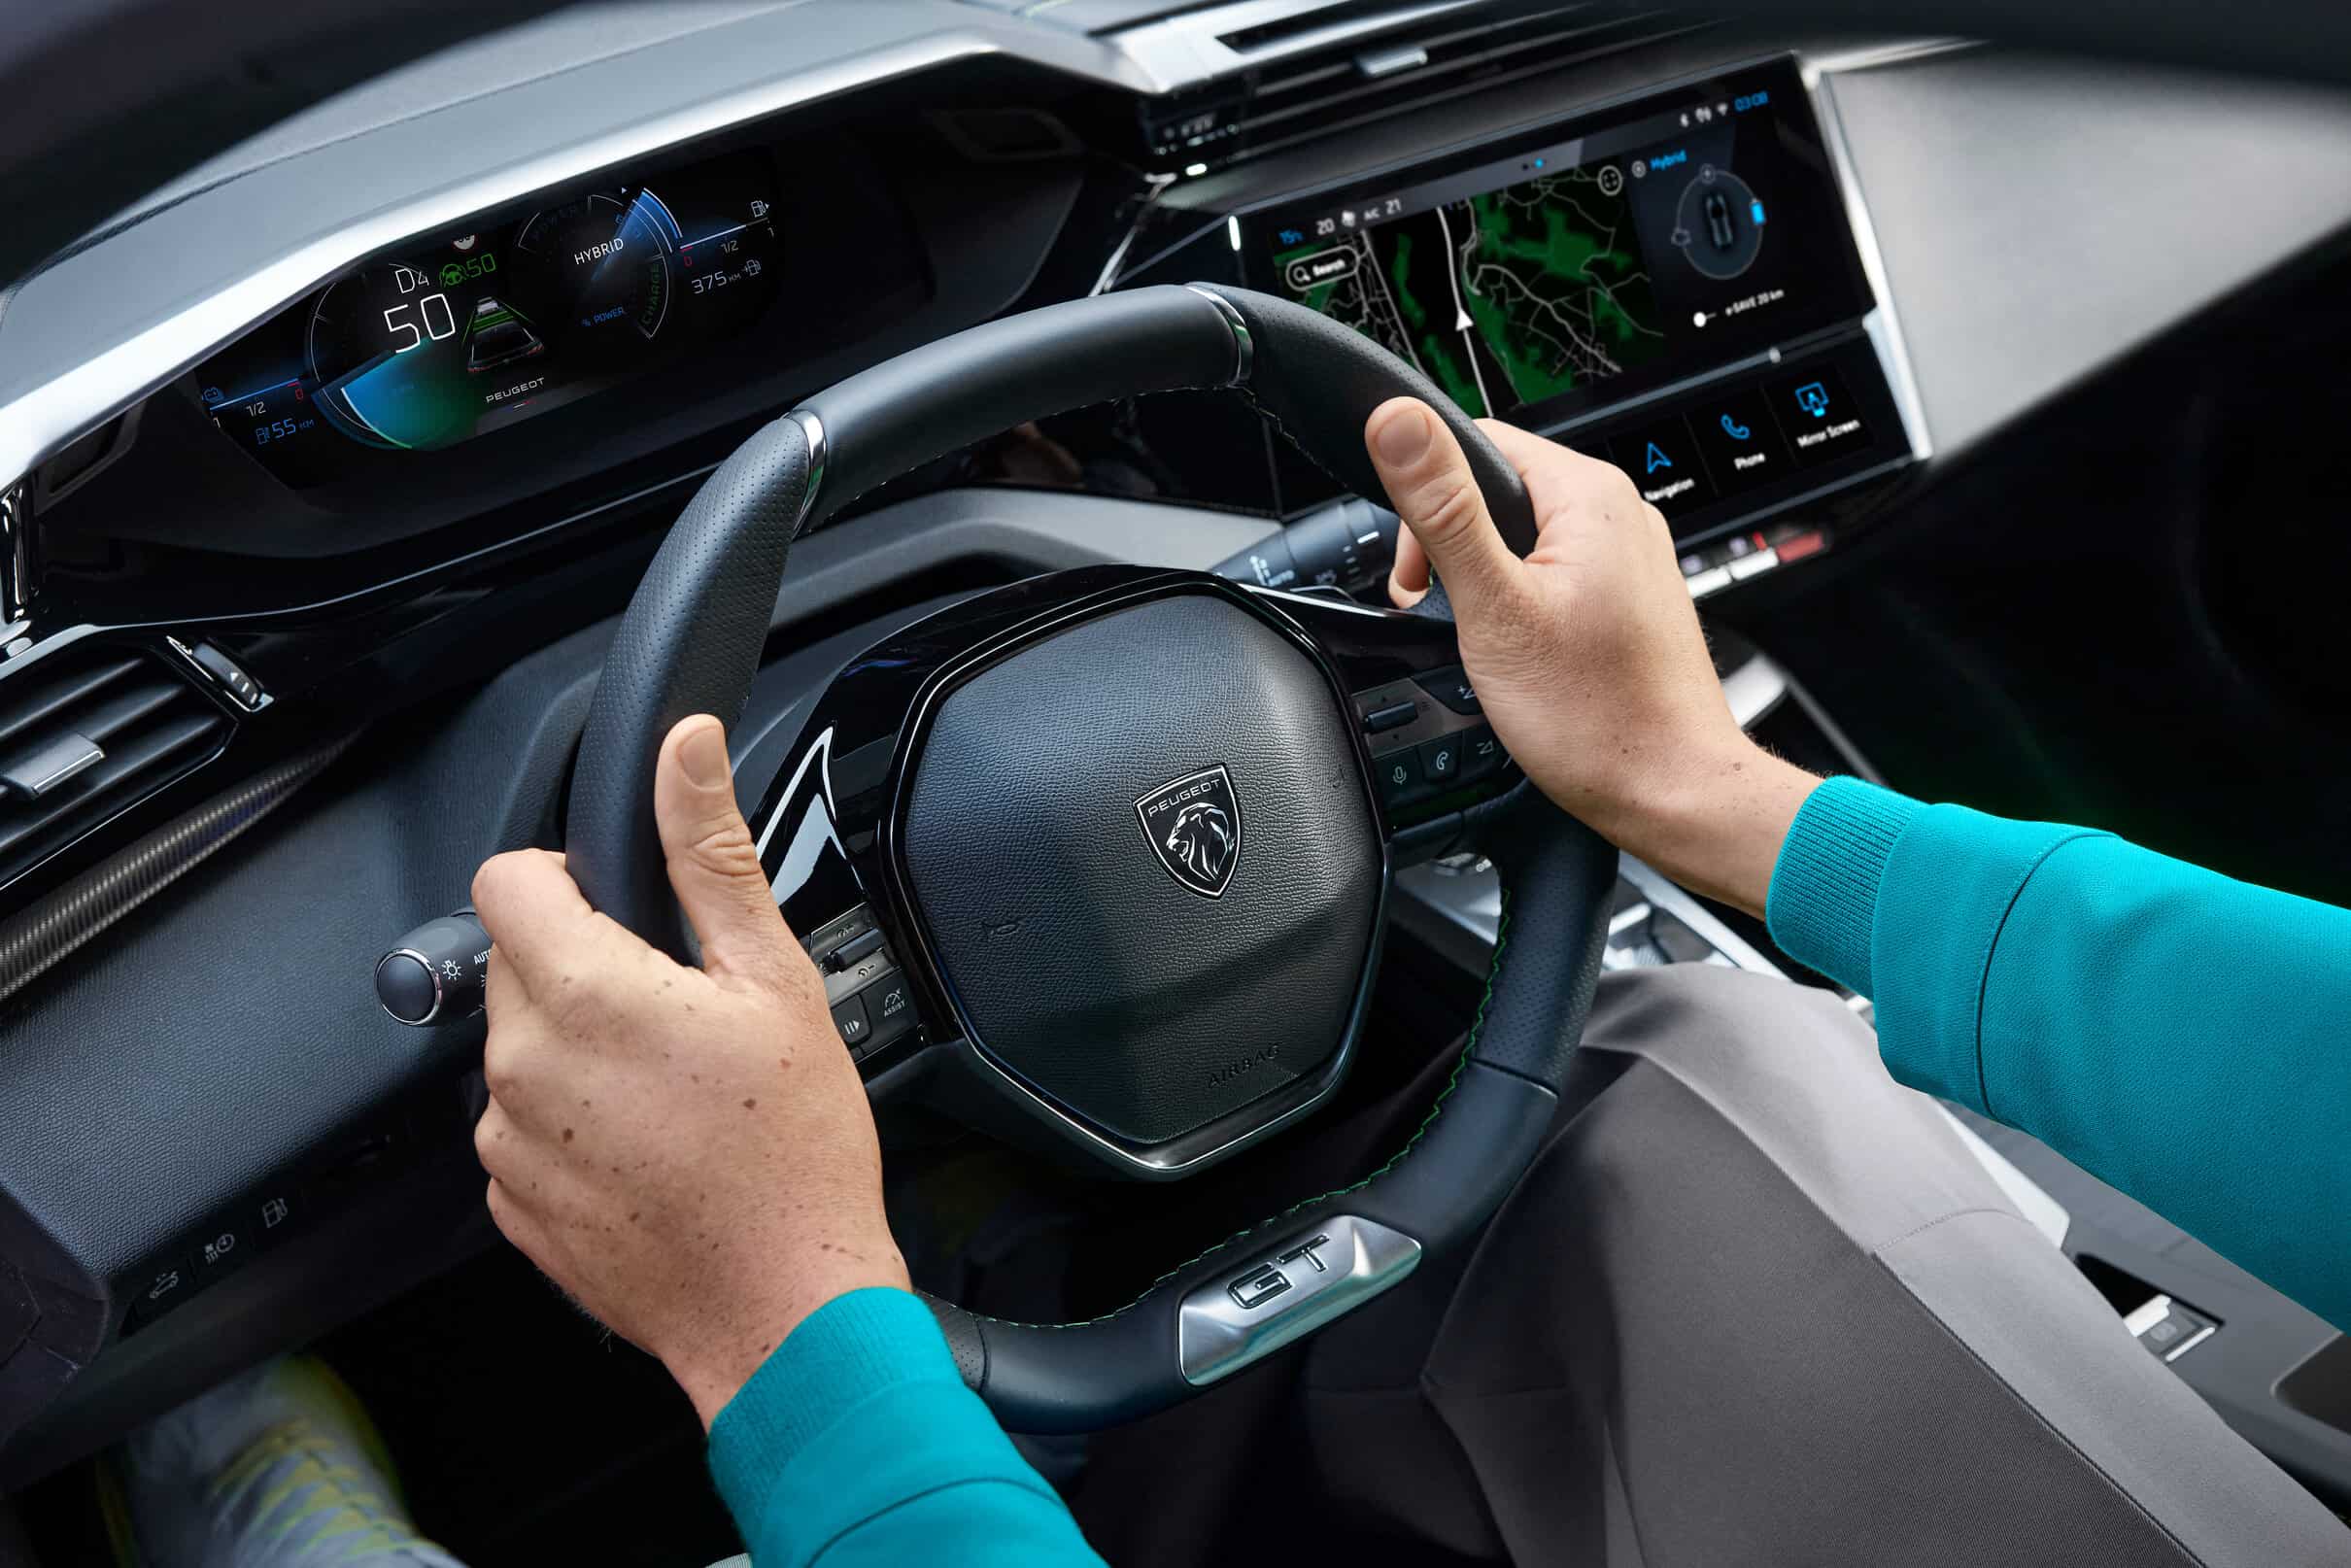 Peugeot 408 Interior - Luxurious cabin with modern design elements